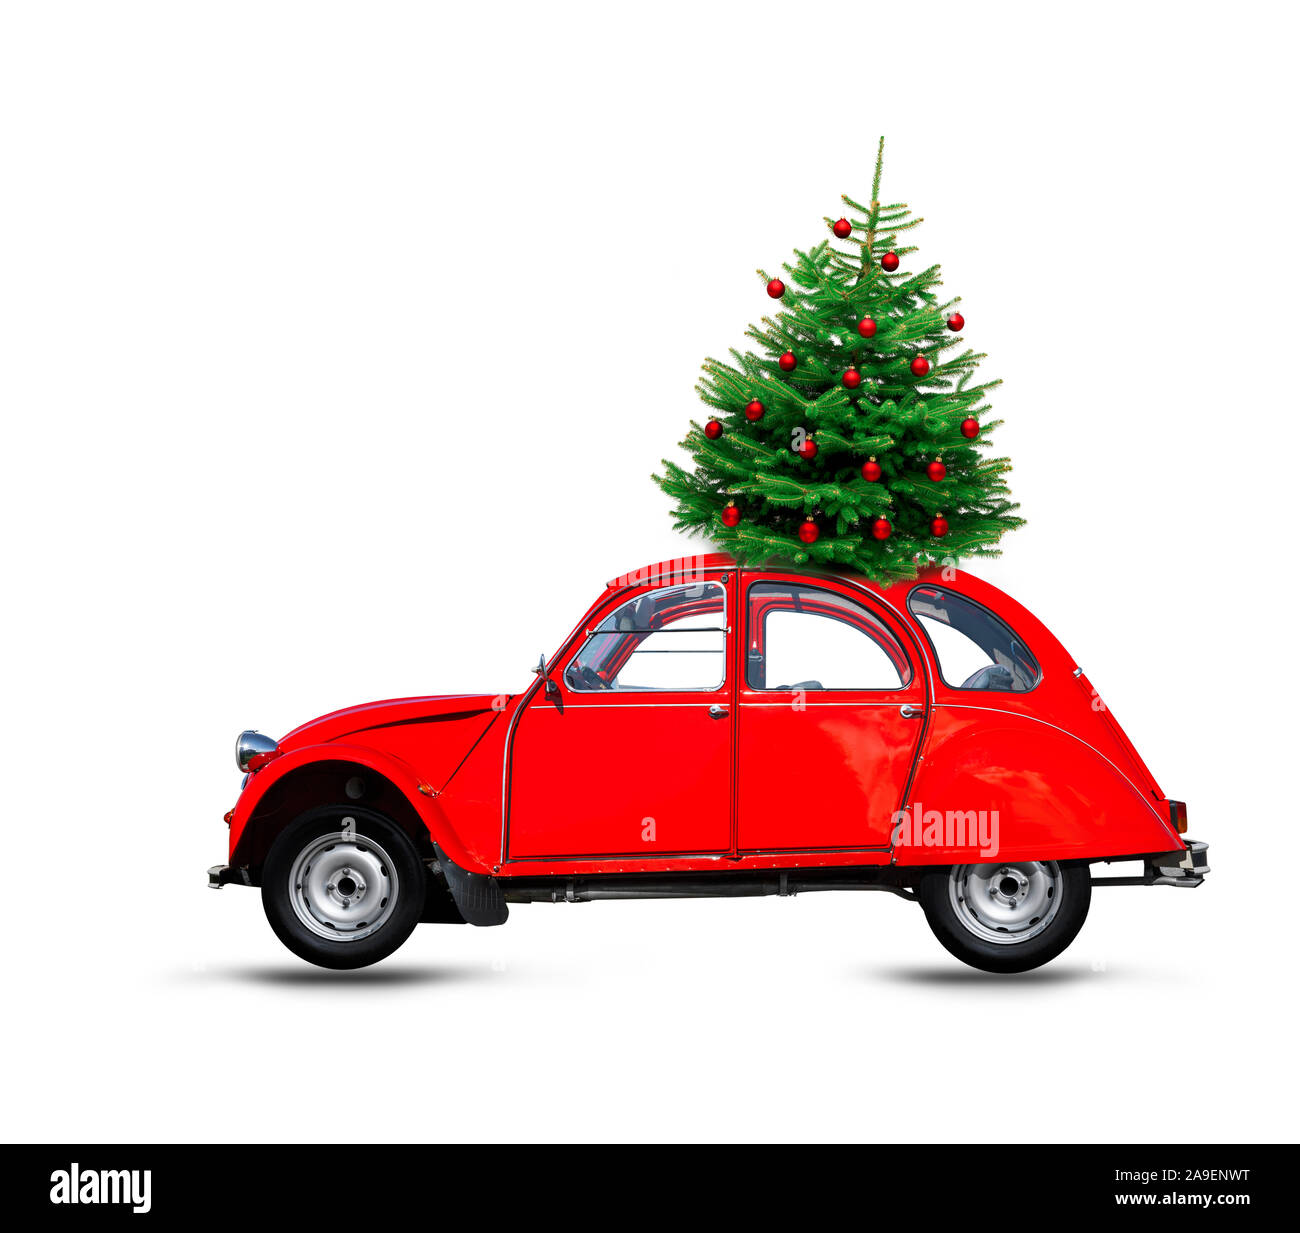 Car 'duck' with Christmas tree Stock Photo